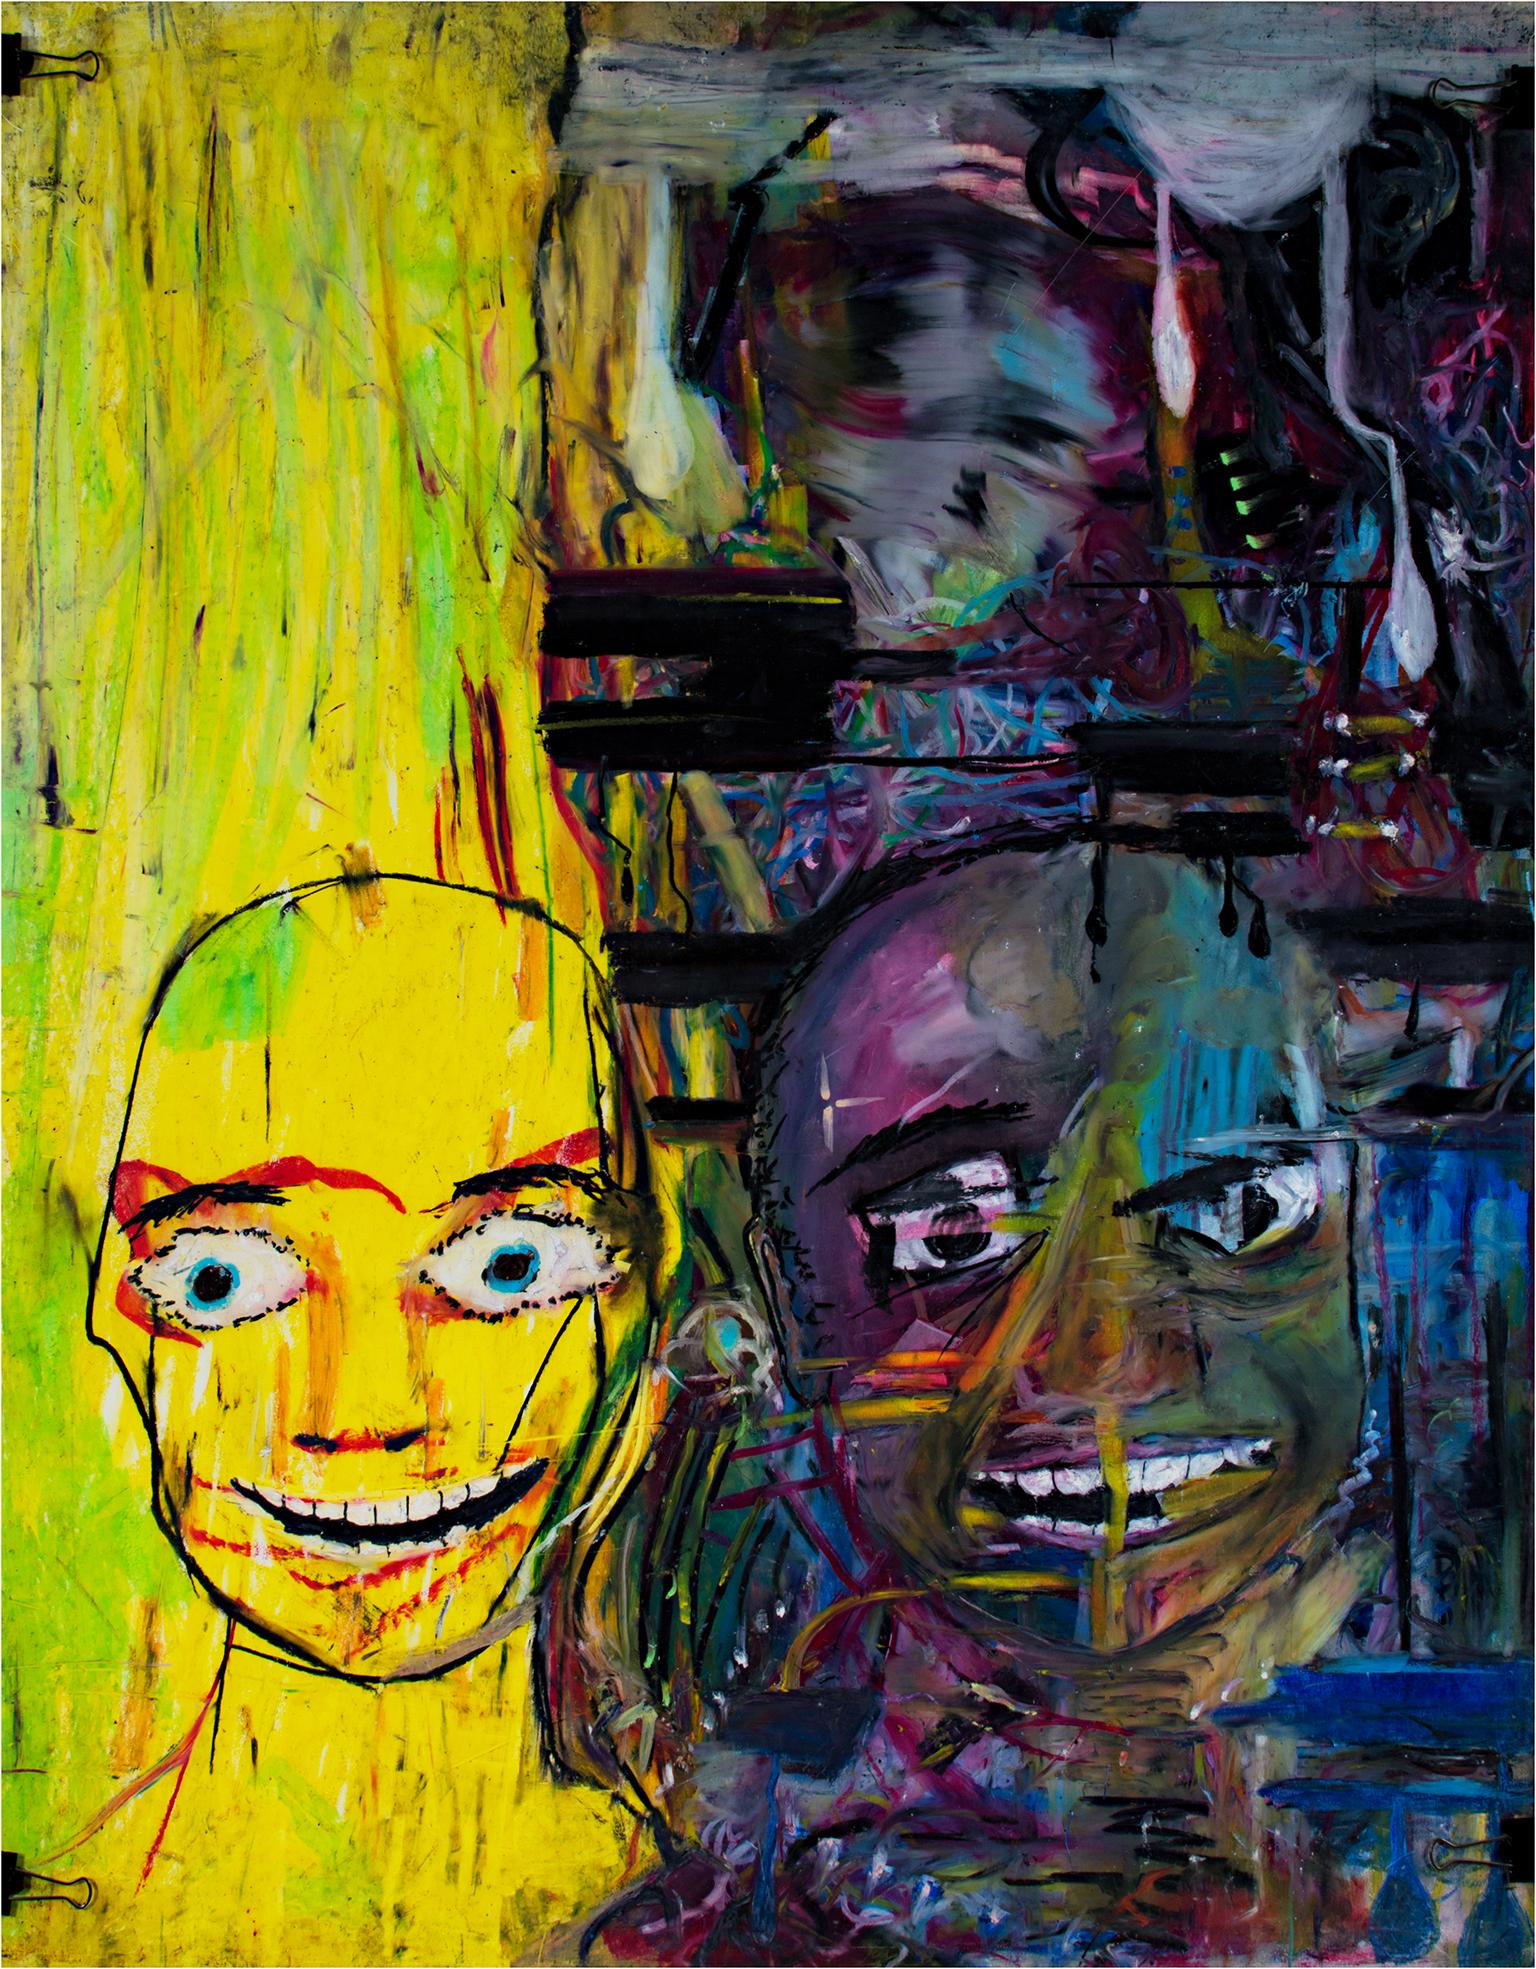 "Get Off the Avenue" is an original oil pastel drawing by Reginald K. Gee. The artist signed the piece on the back. This artwork depicts two abstracted faces--one in bright yellows and green and the other in dark blue and purple hues. 

40" x 28"